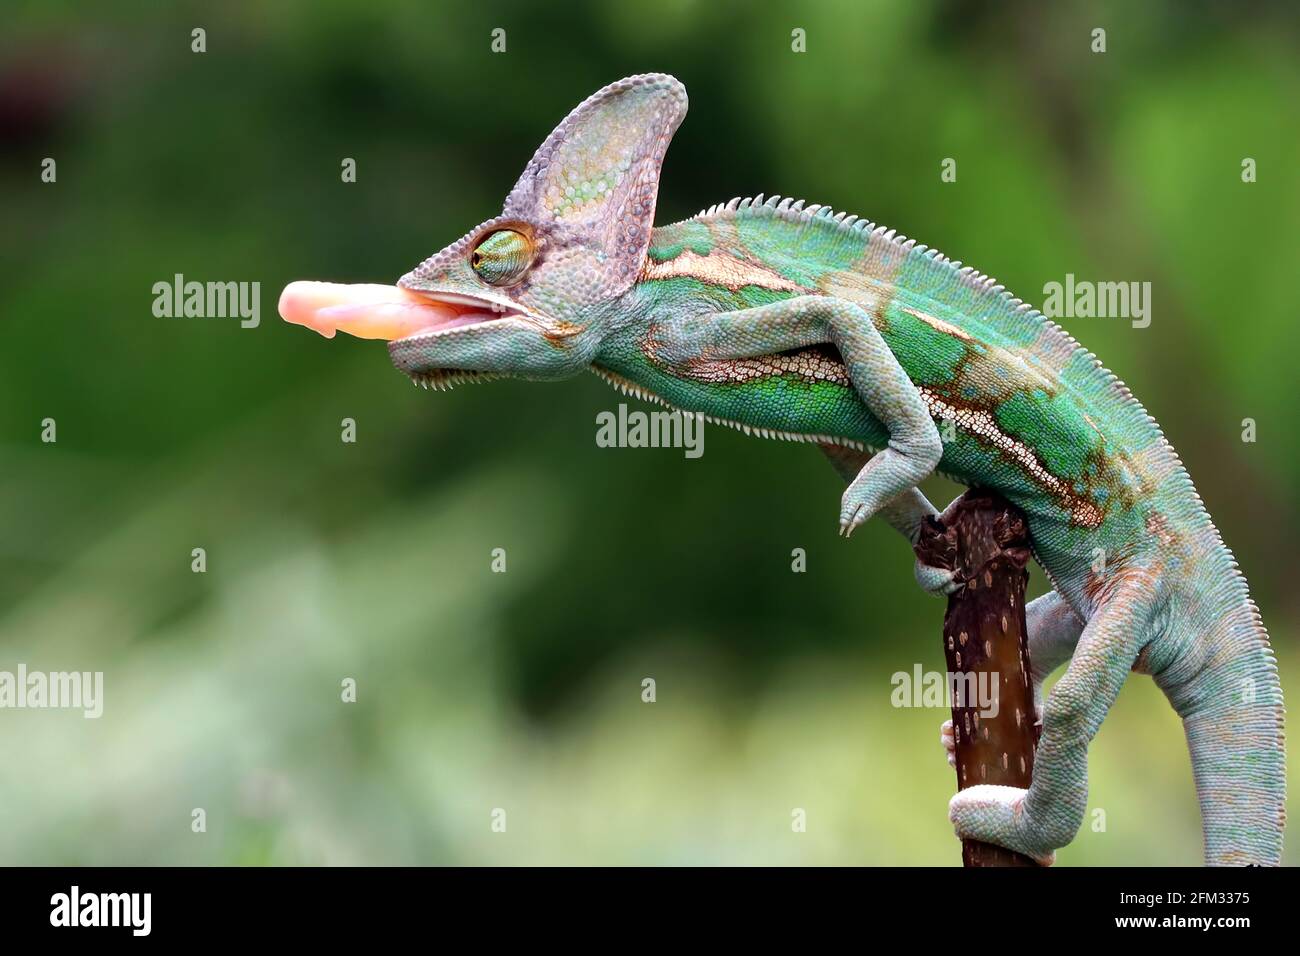 Veiled Chameleon sticking out its tongue ready to catch prey, Indonesia Stock Photo